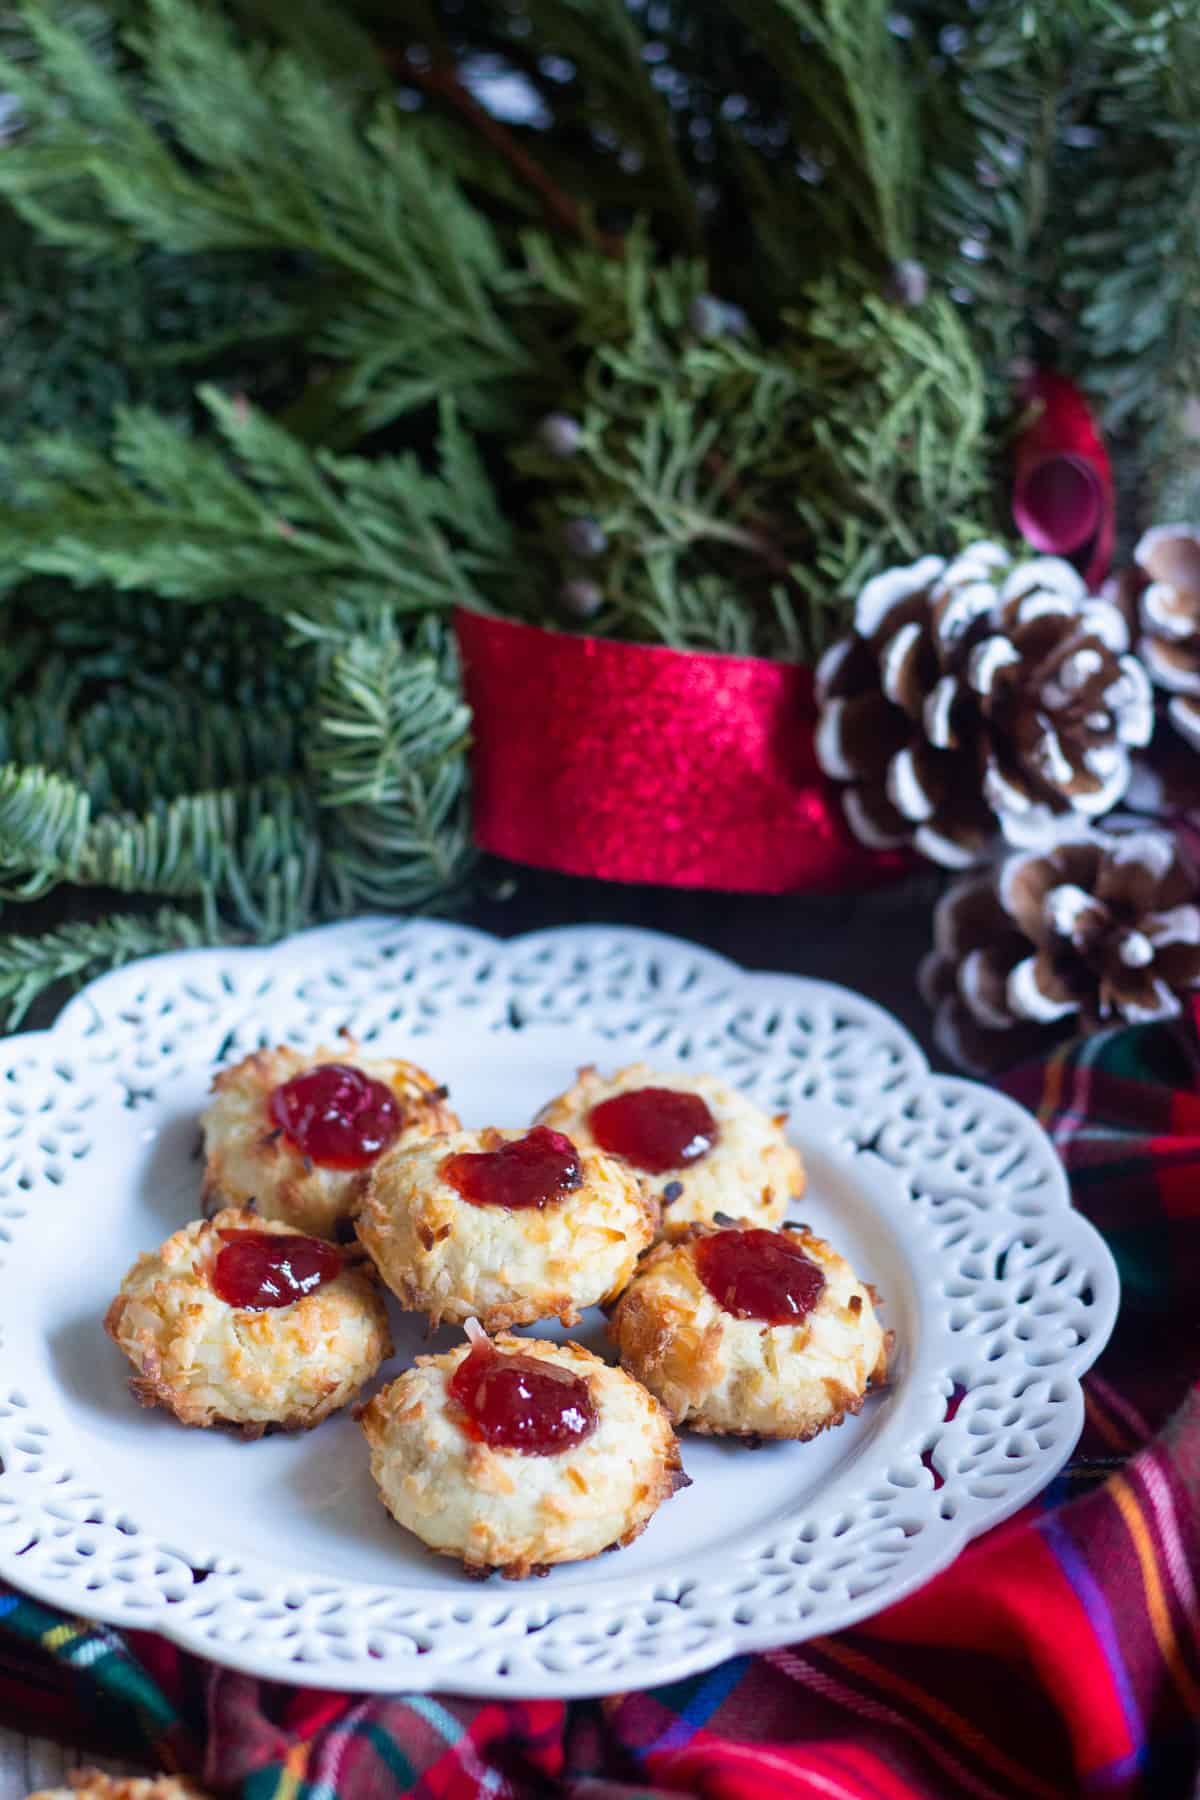 Thumbprint cookies are a classic holiday favorite. These cookies are filled with delicious raspberry jam, perfect for the holidays!
